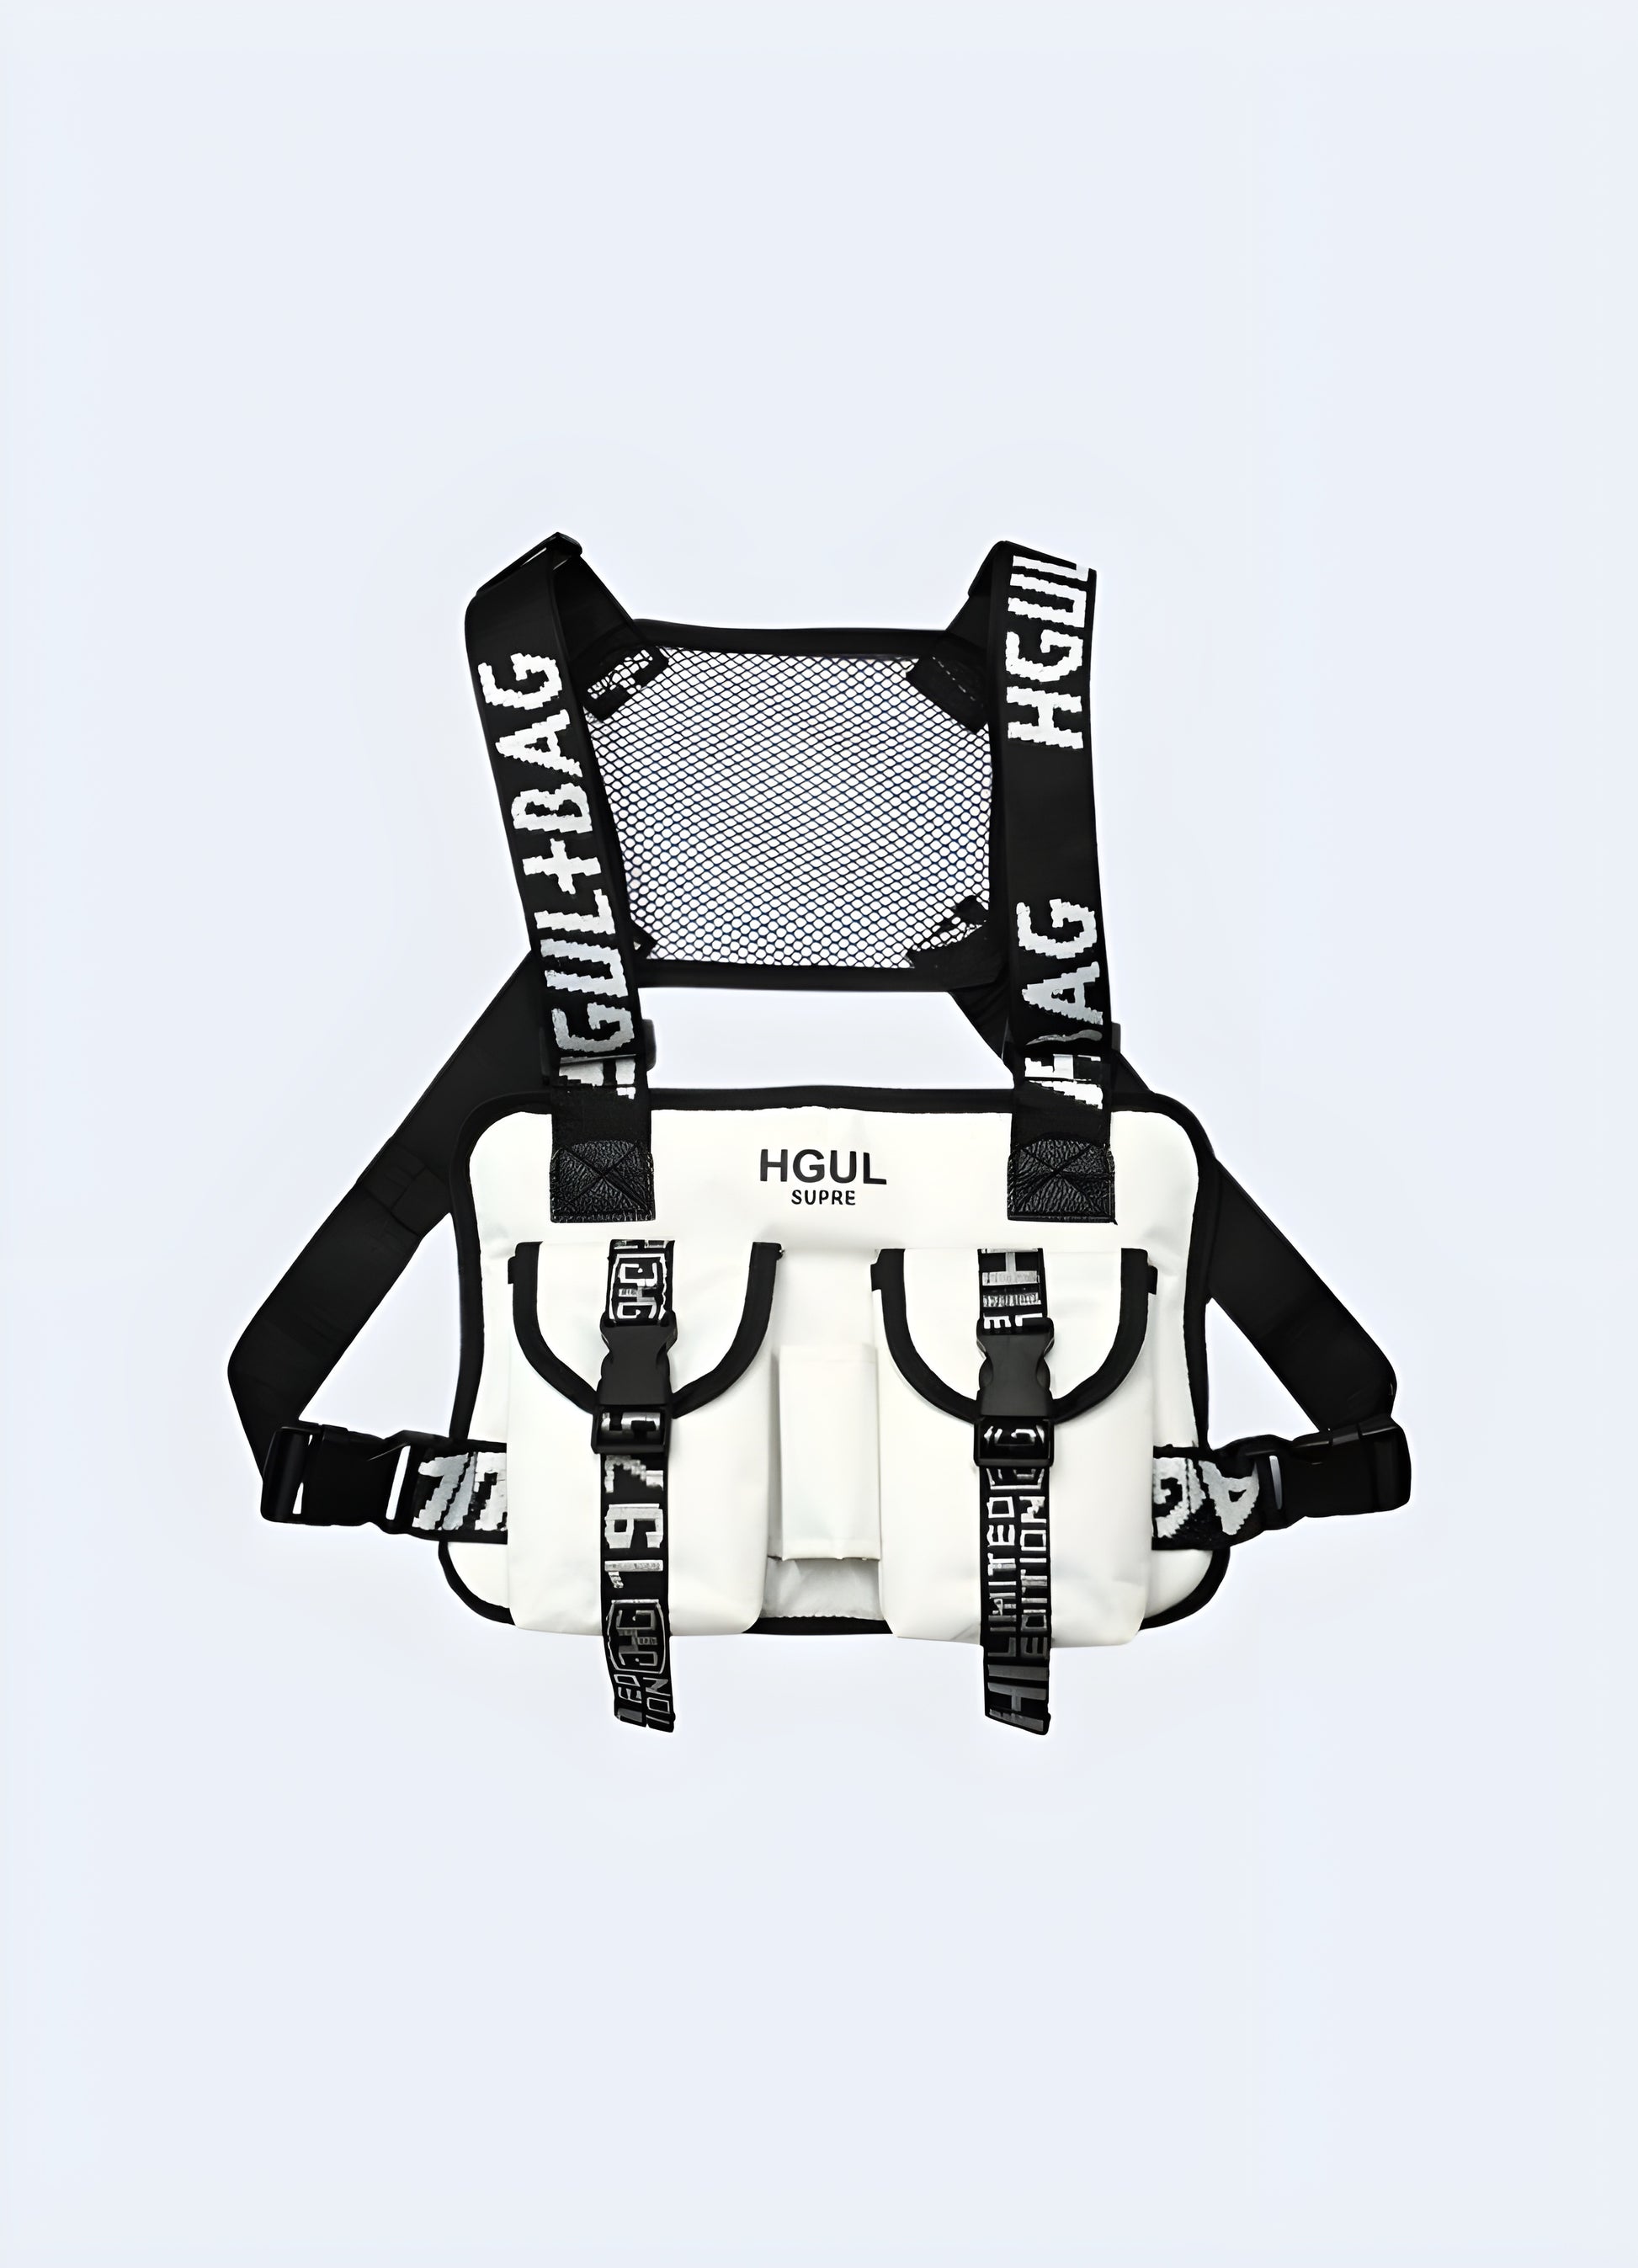 The bag comes in black and white, so you can choose the perfect look to match your personal style.